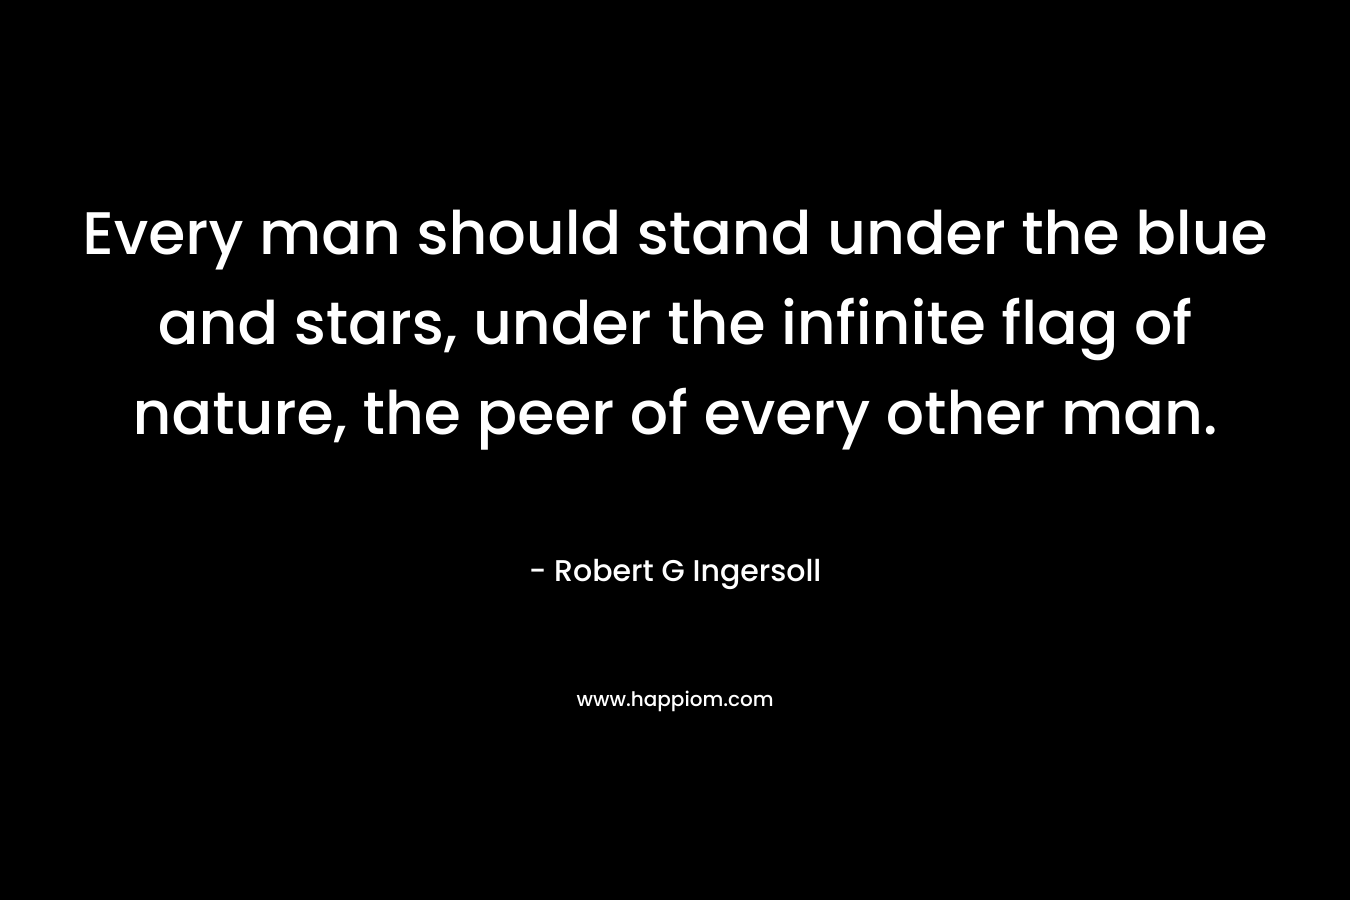 Every man should stand under the blue and stars, under the infinite flag of nature, the peer of every other man. – Robert G Ingersoll